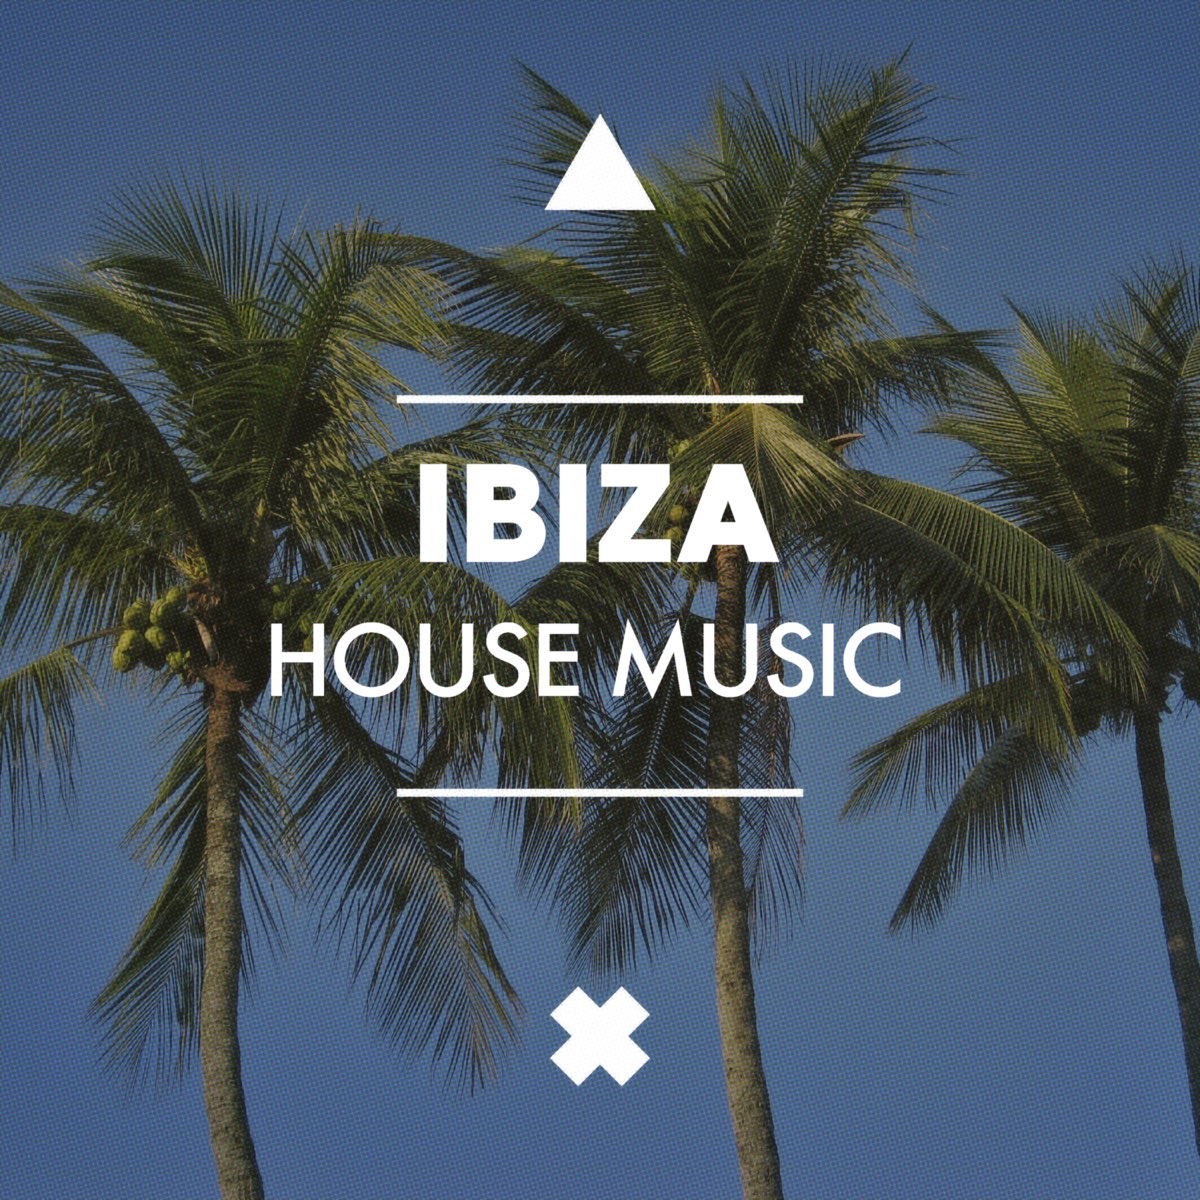 House Music EP by House Music on Apple Music